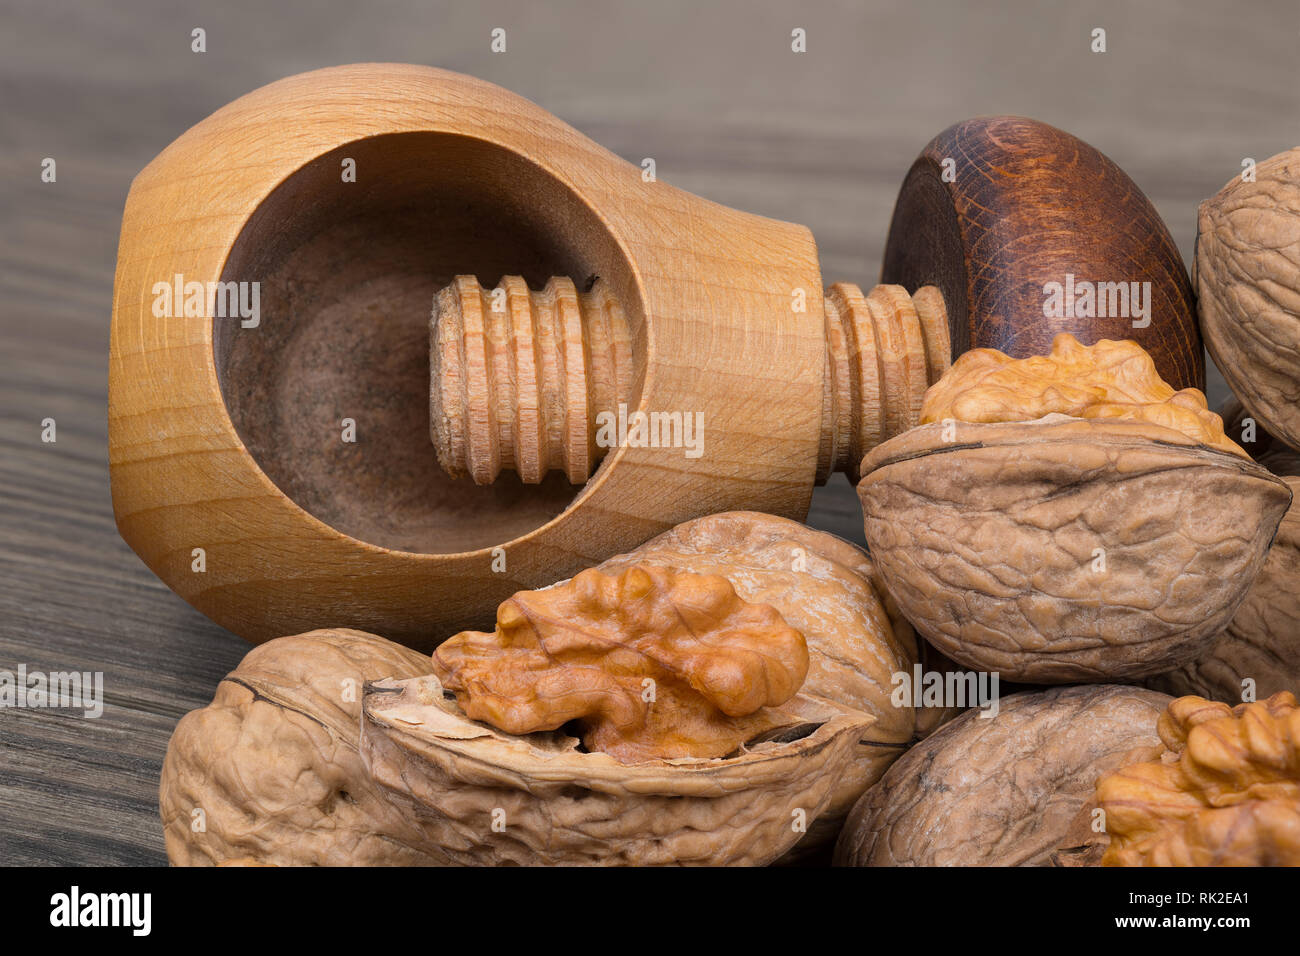 Cracking of walnuts with a wooden screw nutcracker in mushroom shape. Close-up of the kitchen tool and a group of partly peeled nuts with half shells. Stock Photo